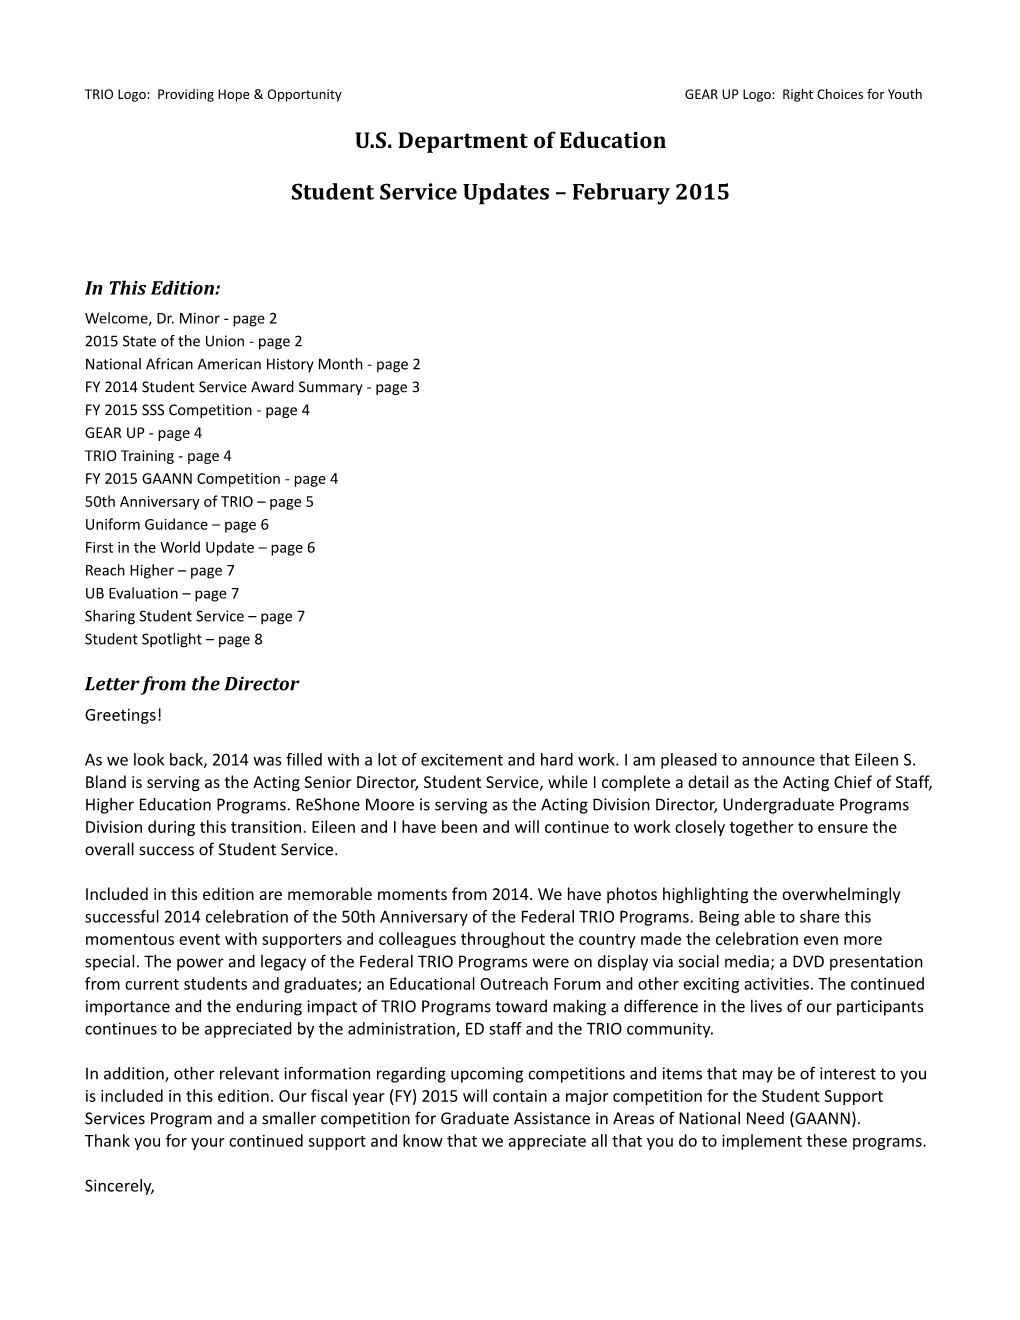 Student Service Updates February 2015 Newsletter (MS Word)